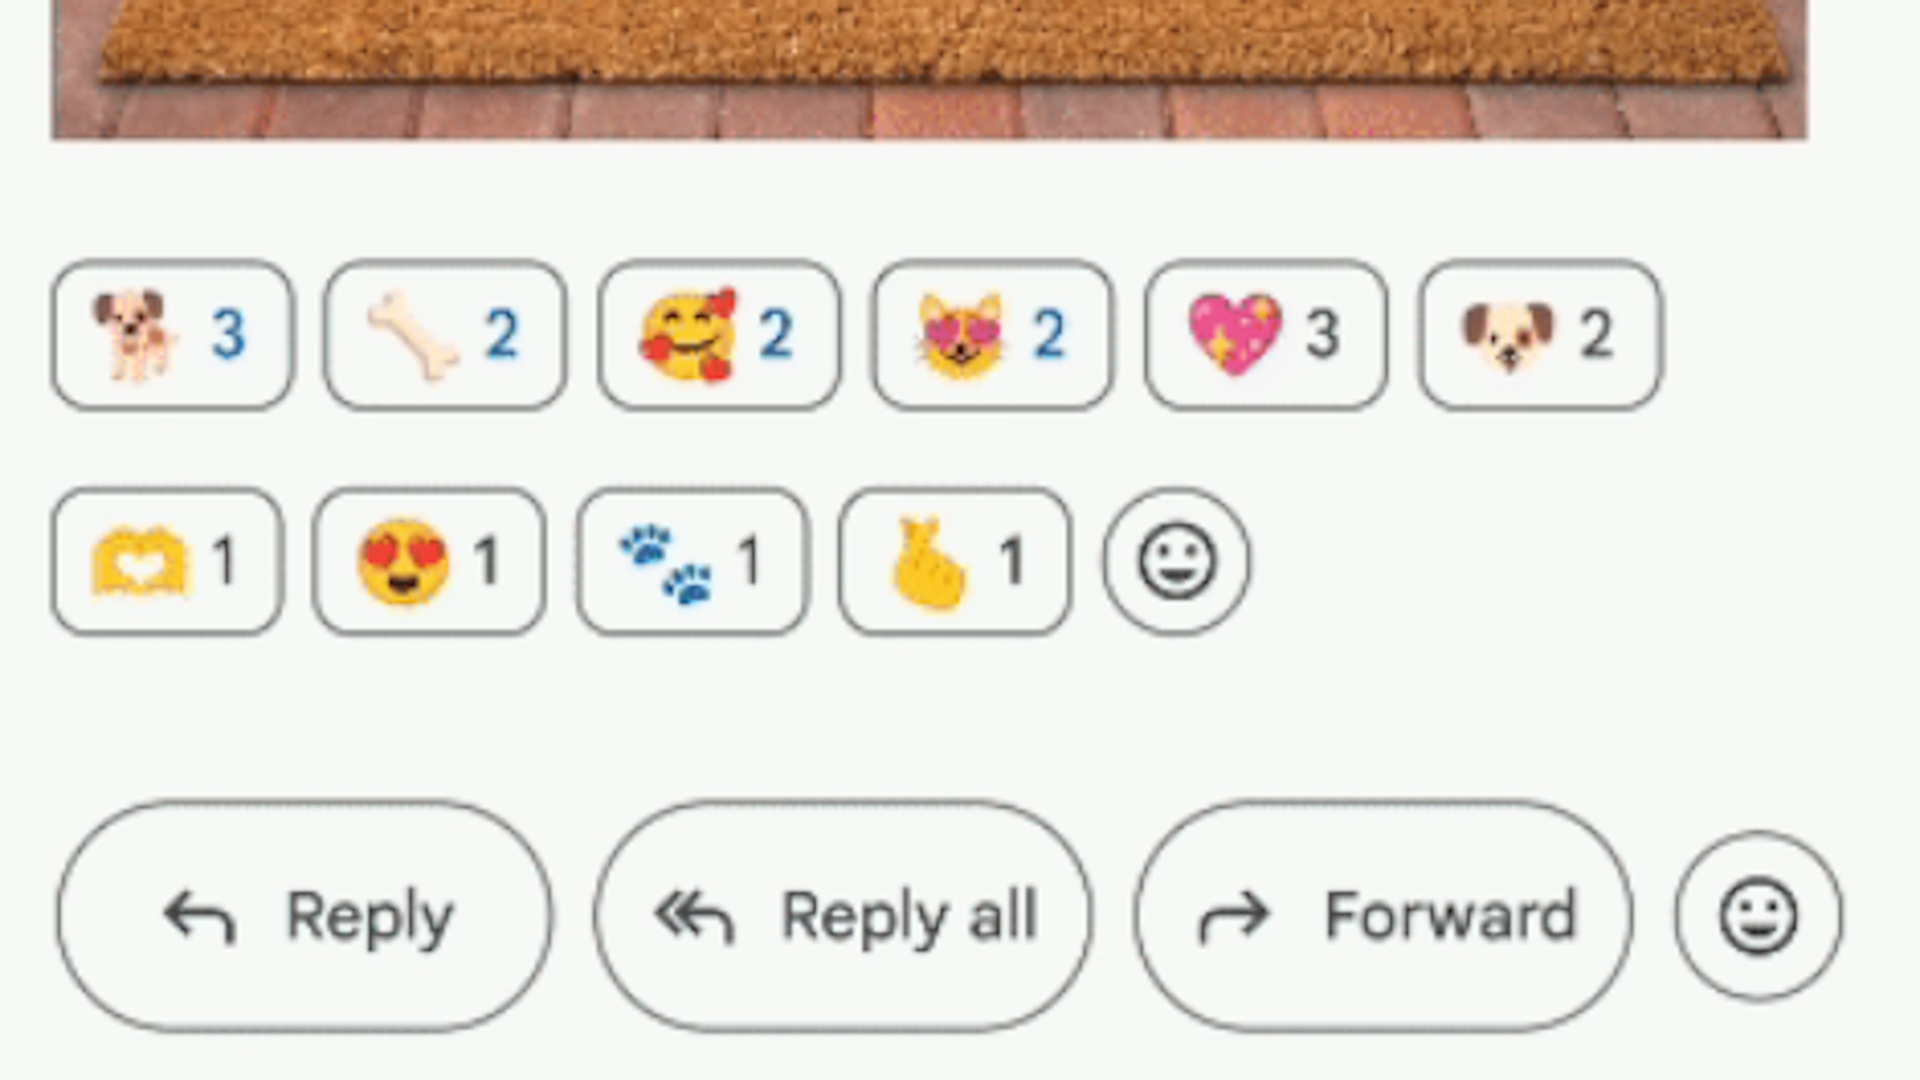 Gmail frees you from unnecessary replies to emails by adding reactions with emoticons